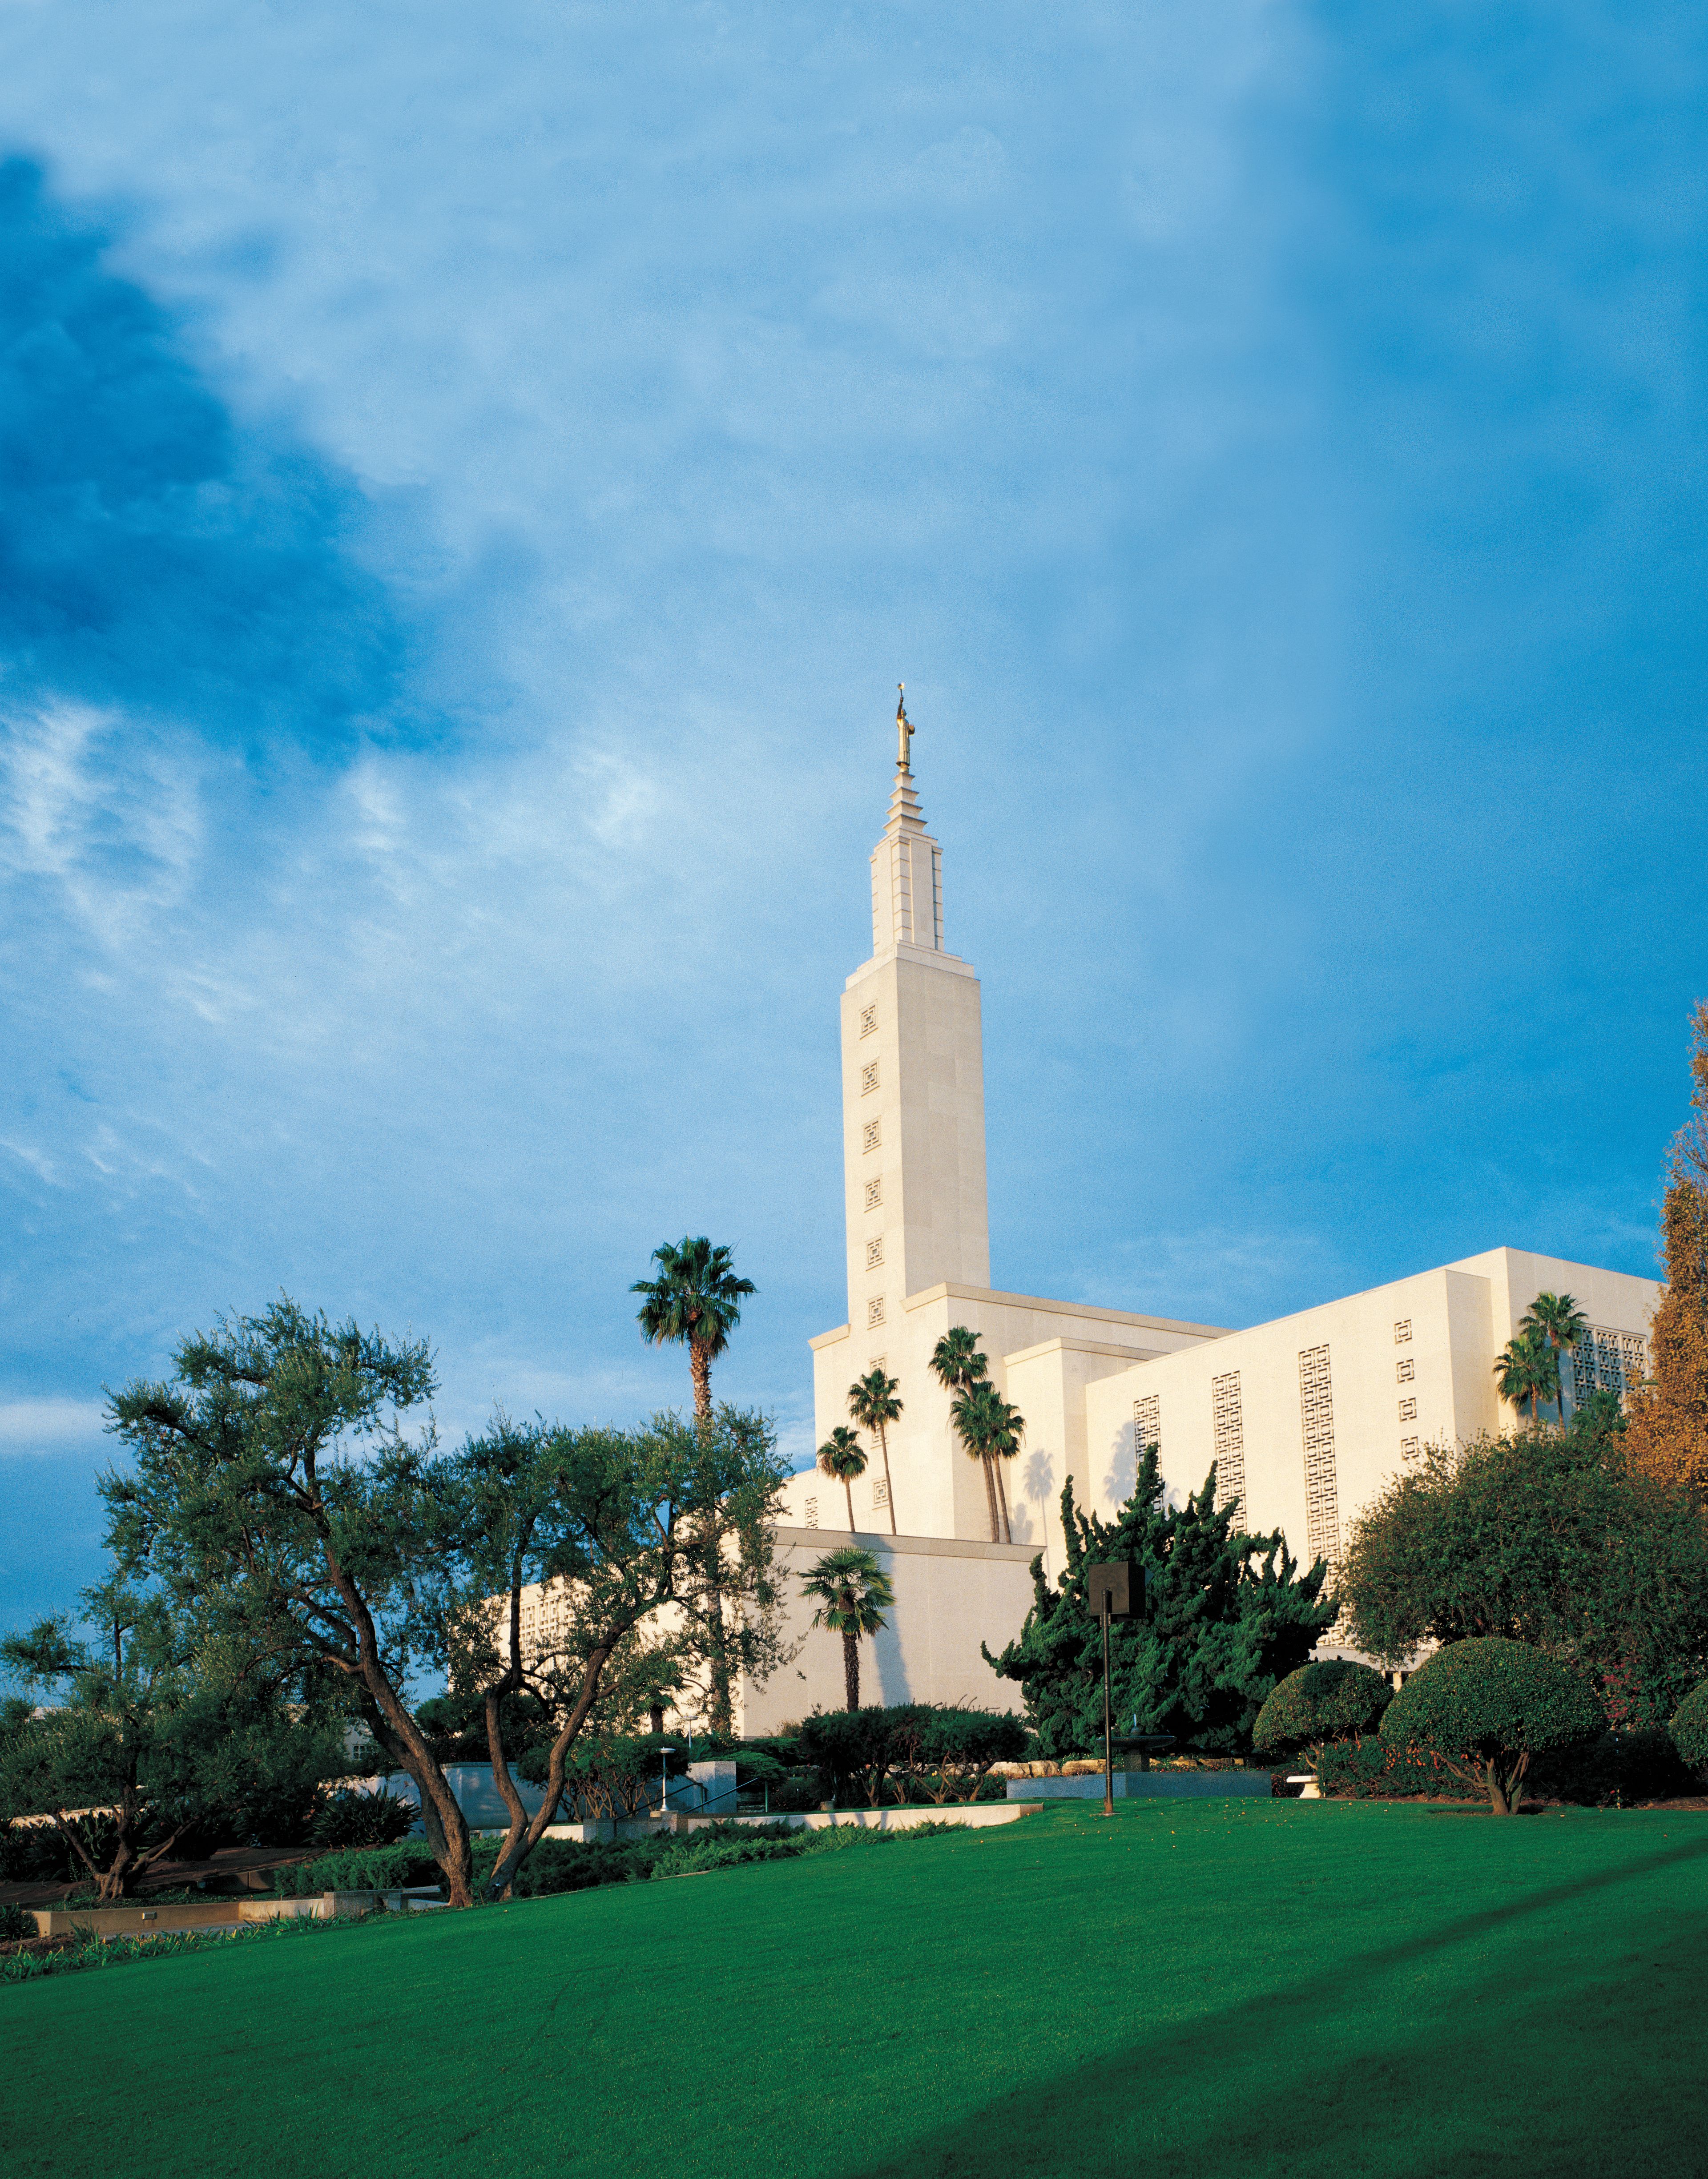 The Los Angeles California Temple exterior, including scenery.